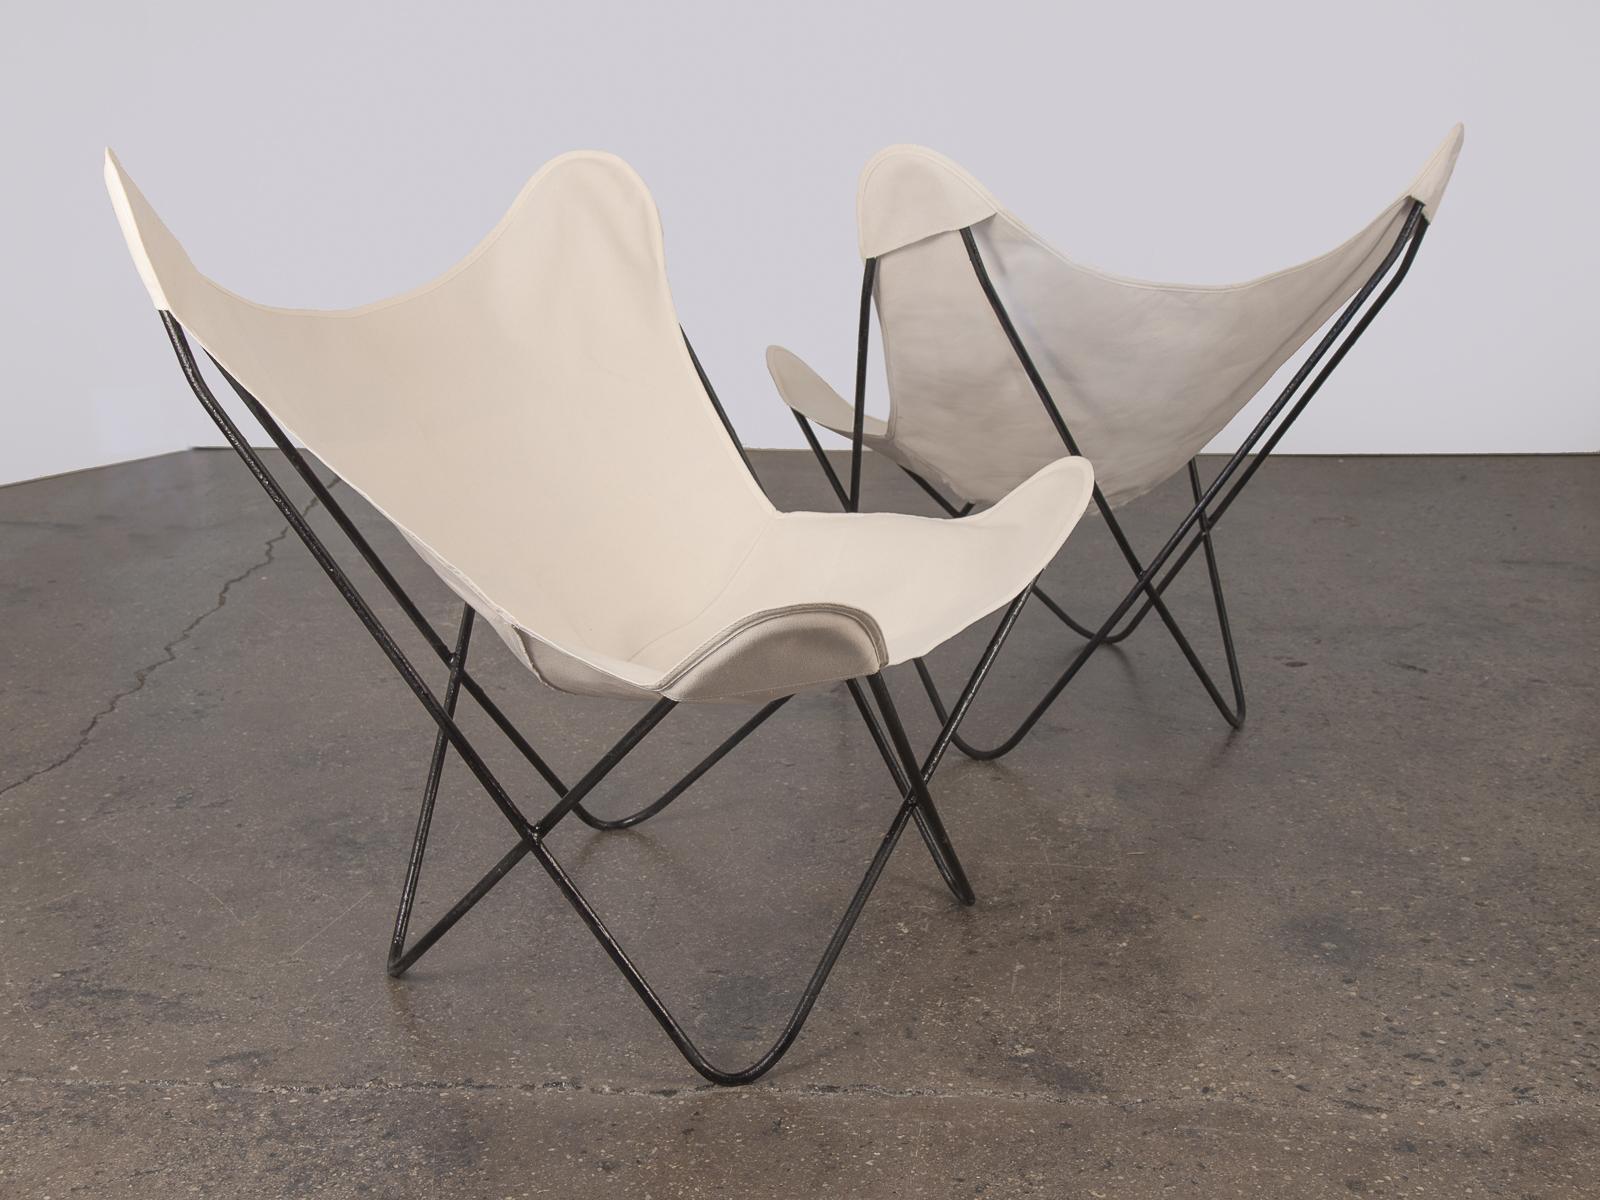 BKF Hardoy butterfly chairs for Knoll. Dynamic classic form, for indoor or outdoor use. New canvas slings fit nicely on the original knoll metal frames. Pairs available in either cobalt blue or natural canvas.